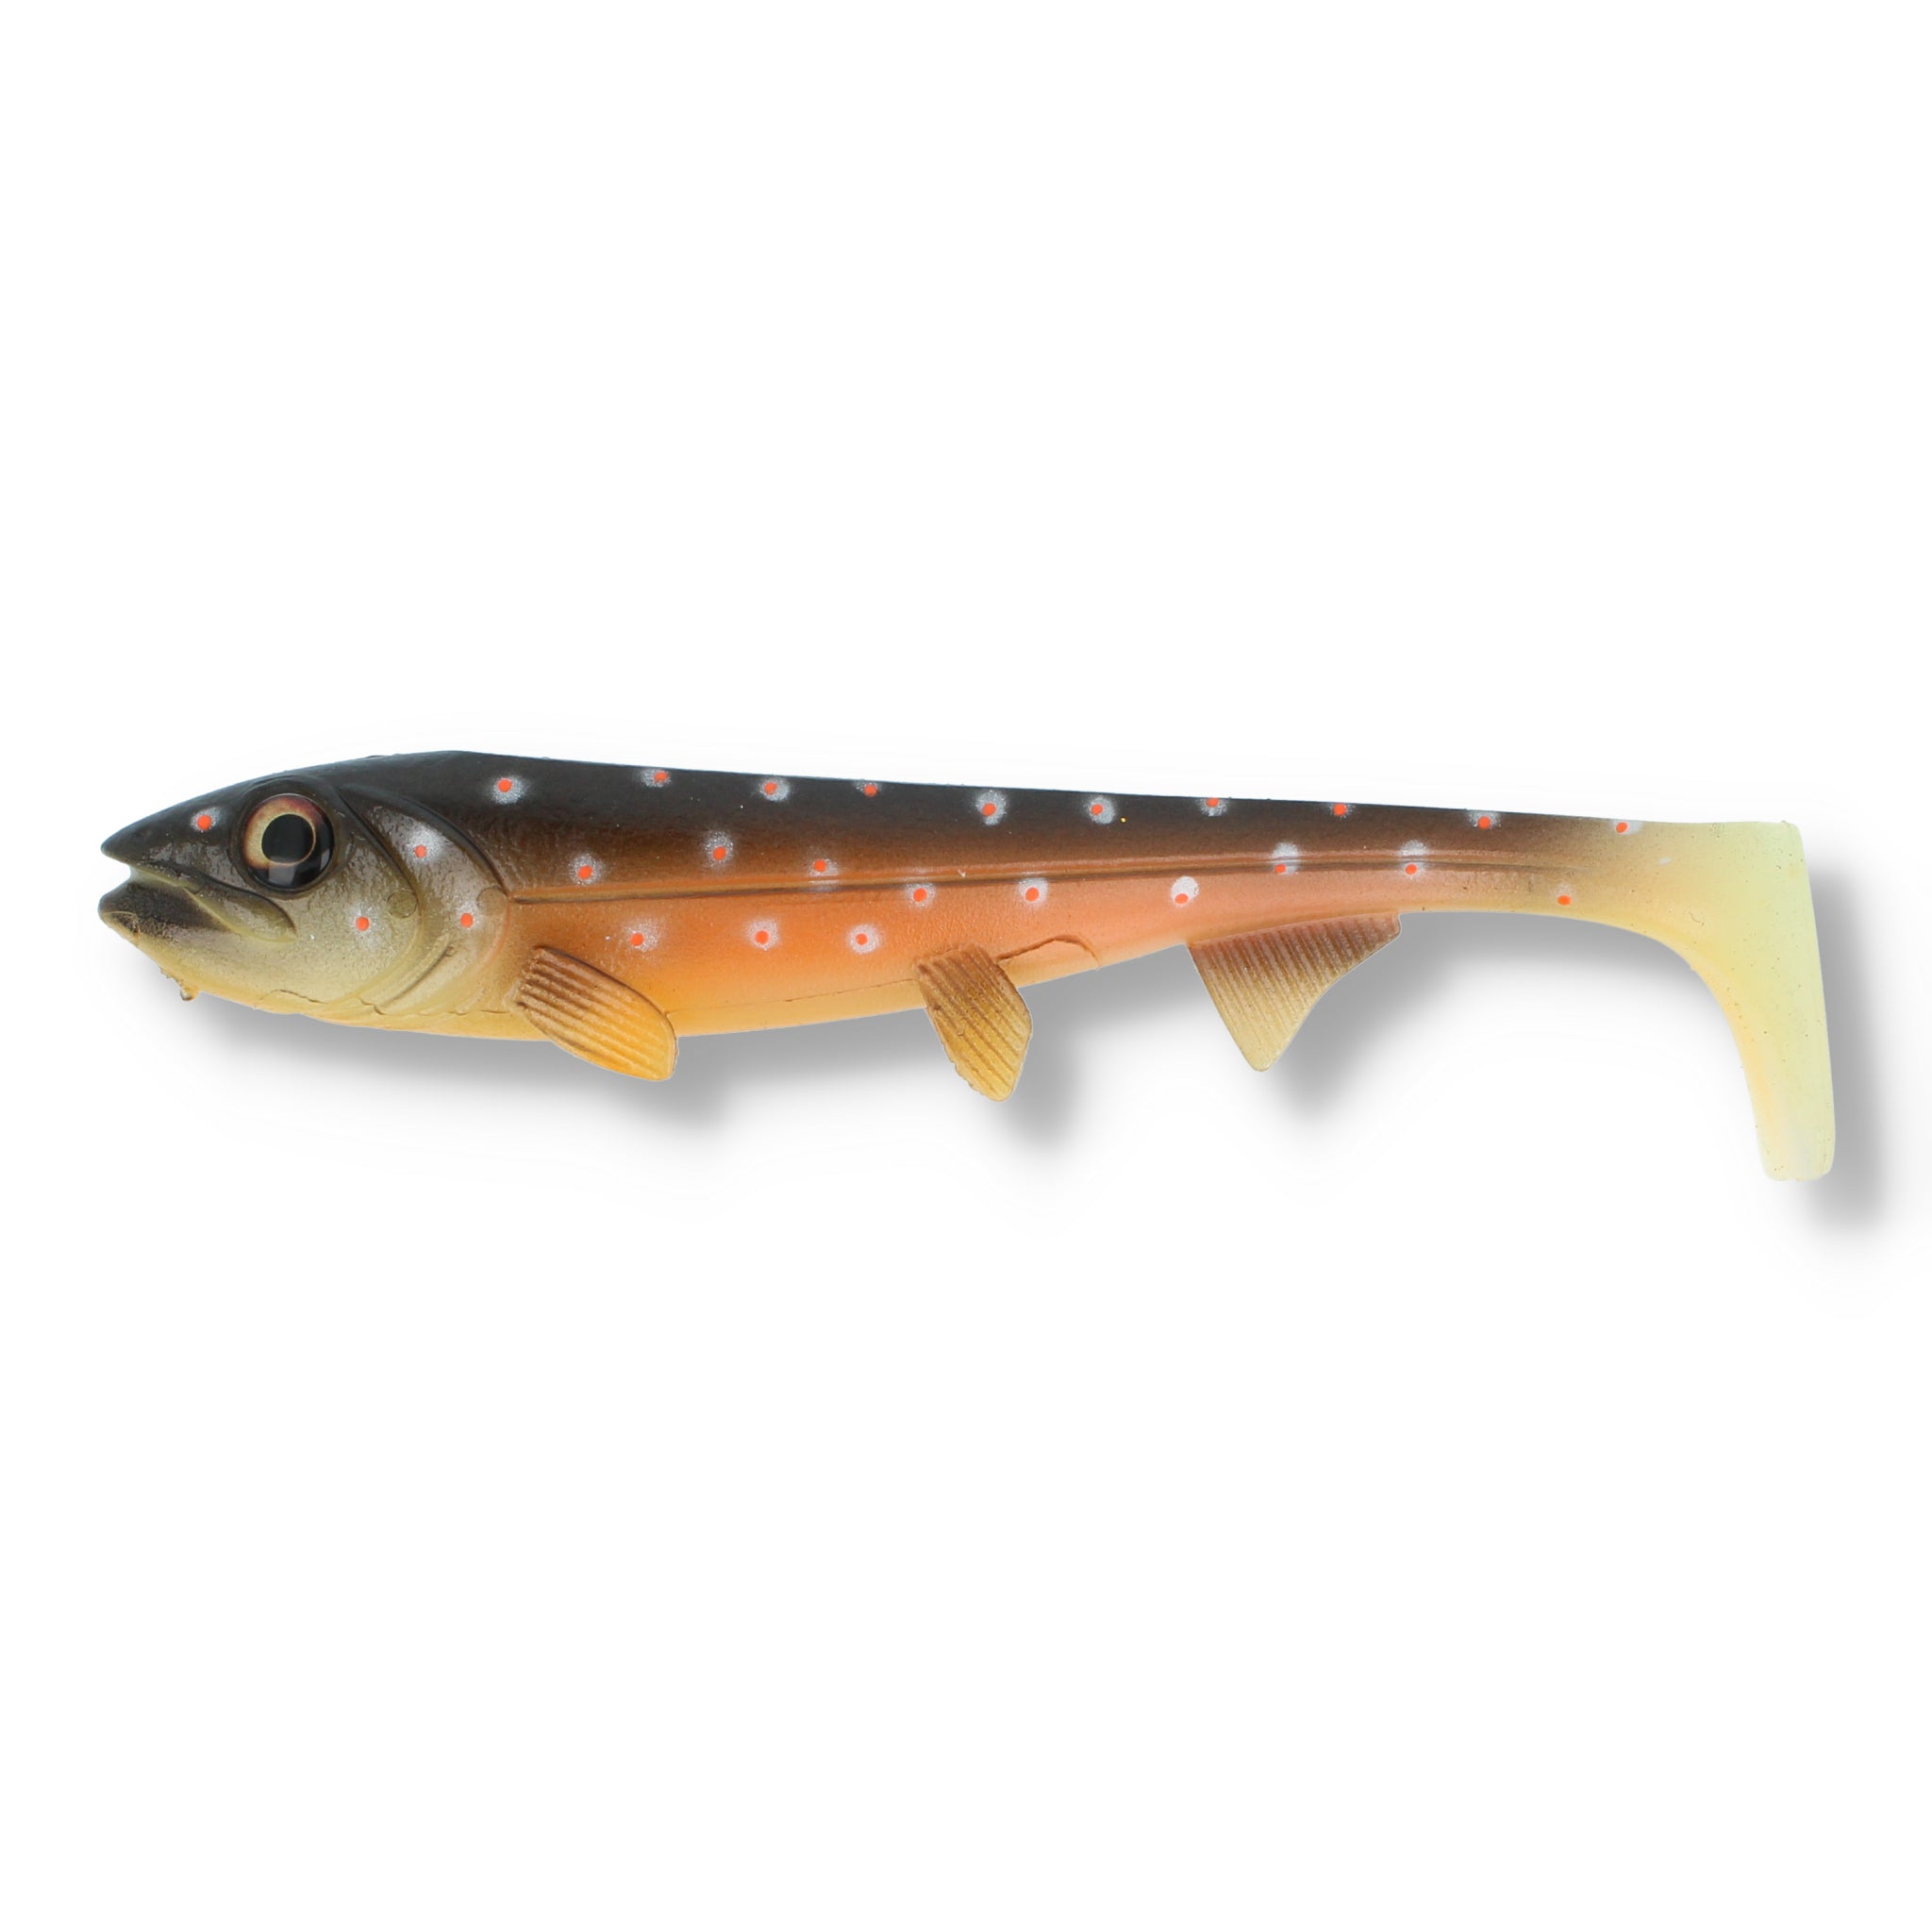 Hostagevalley Lures Shad 7"